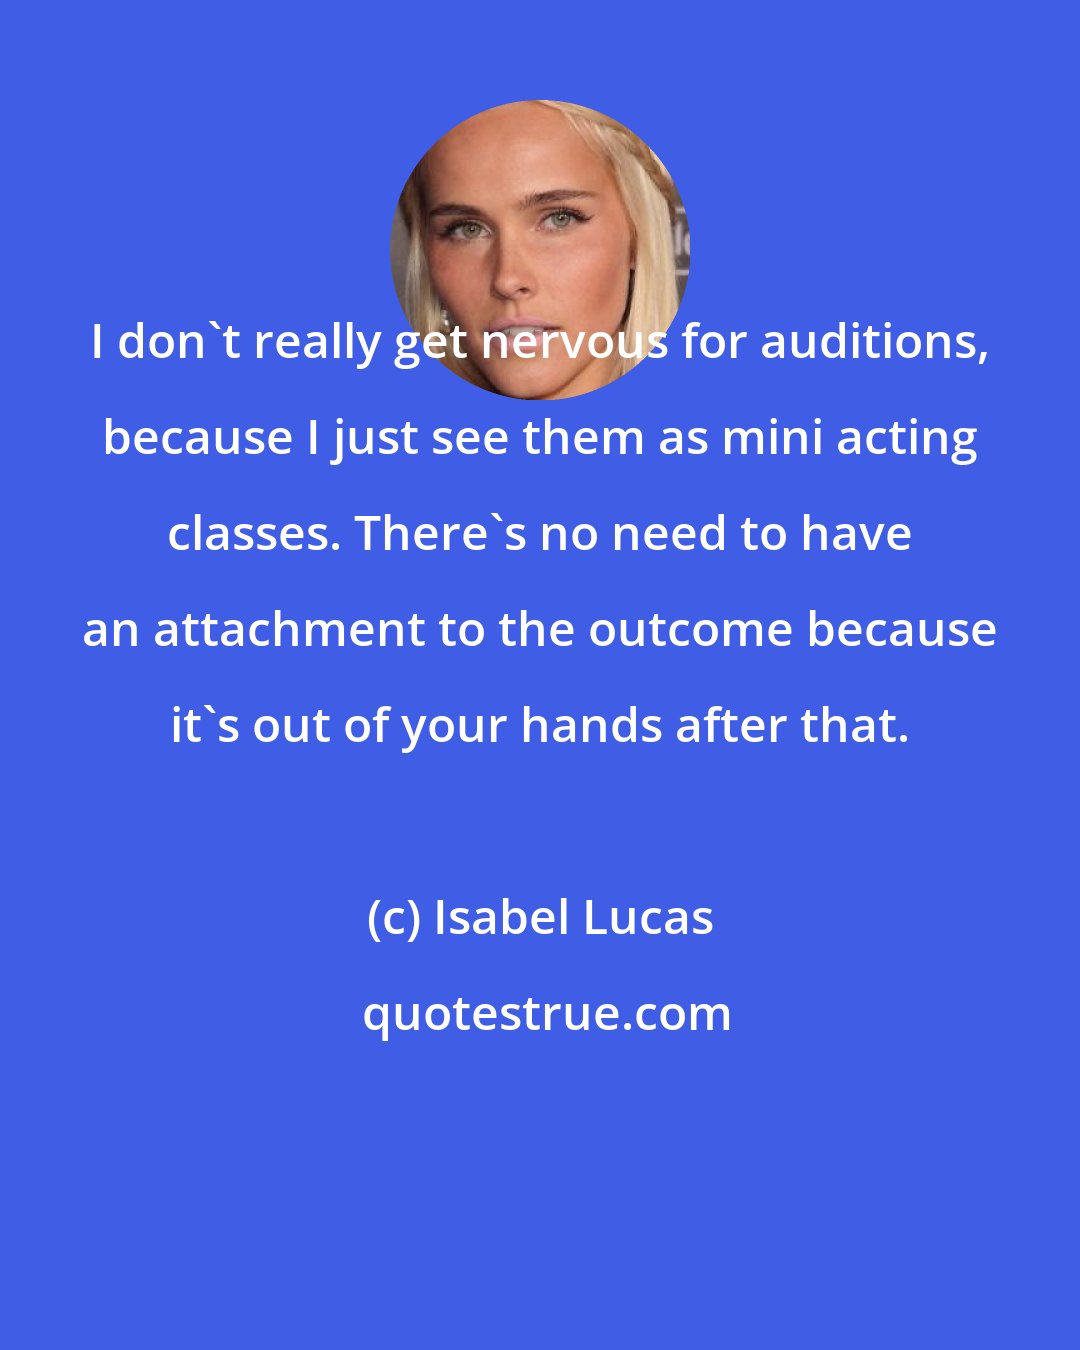 Isabel Lucas: I don't really get nervous for auditions, because I just see them as mini acting classes. There's no need to have an attachment to the outcome because it's out of your hands after that.